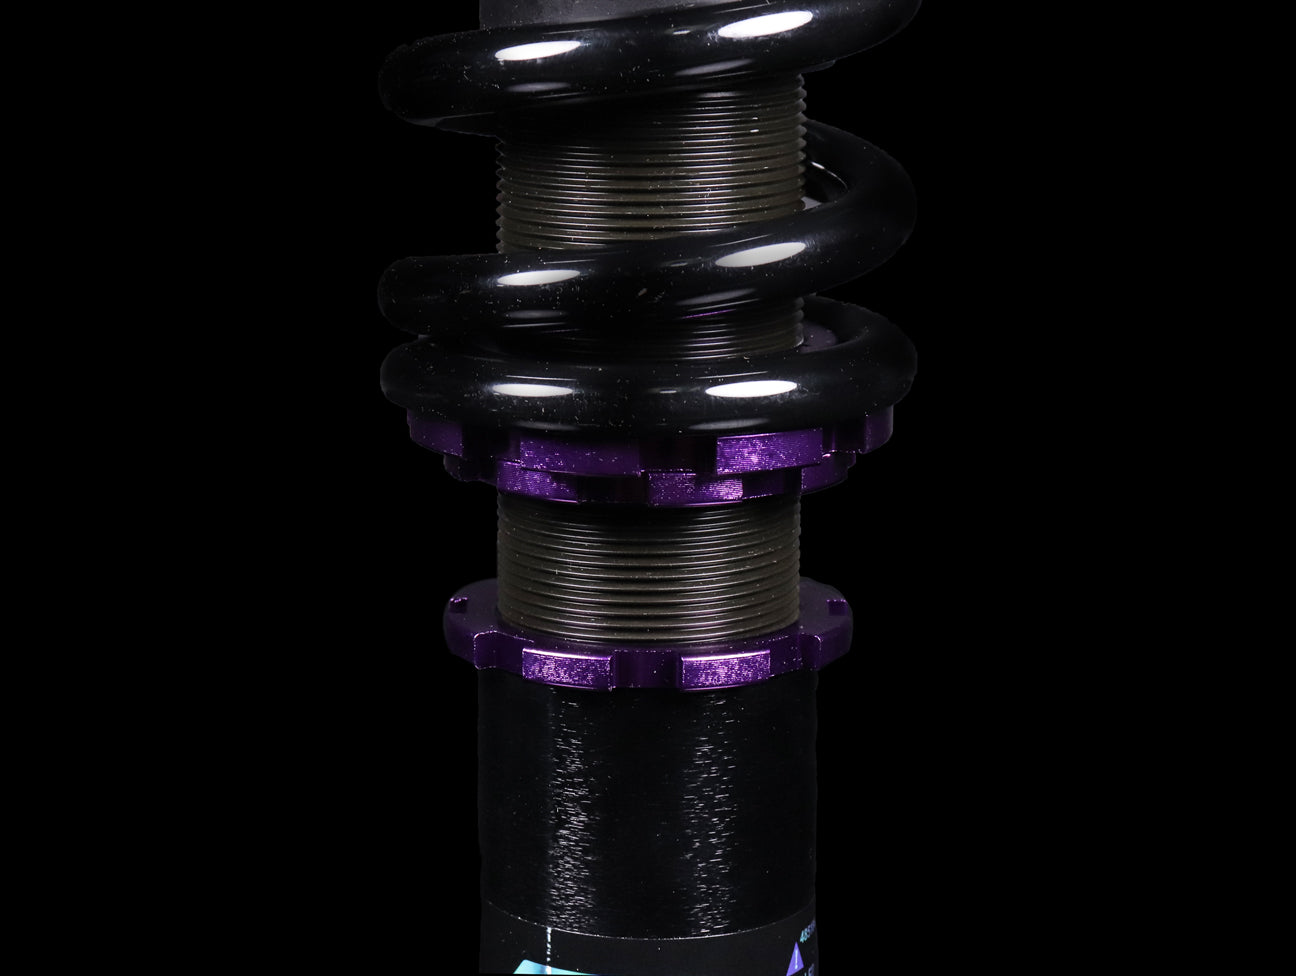 D2 Racing RS Coilover System - CRV / HRV / Element